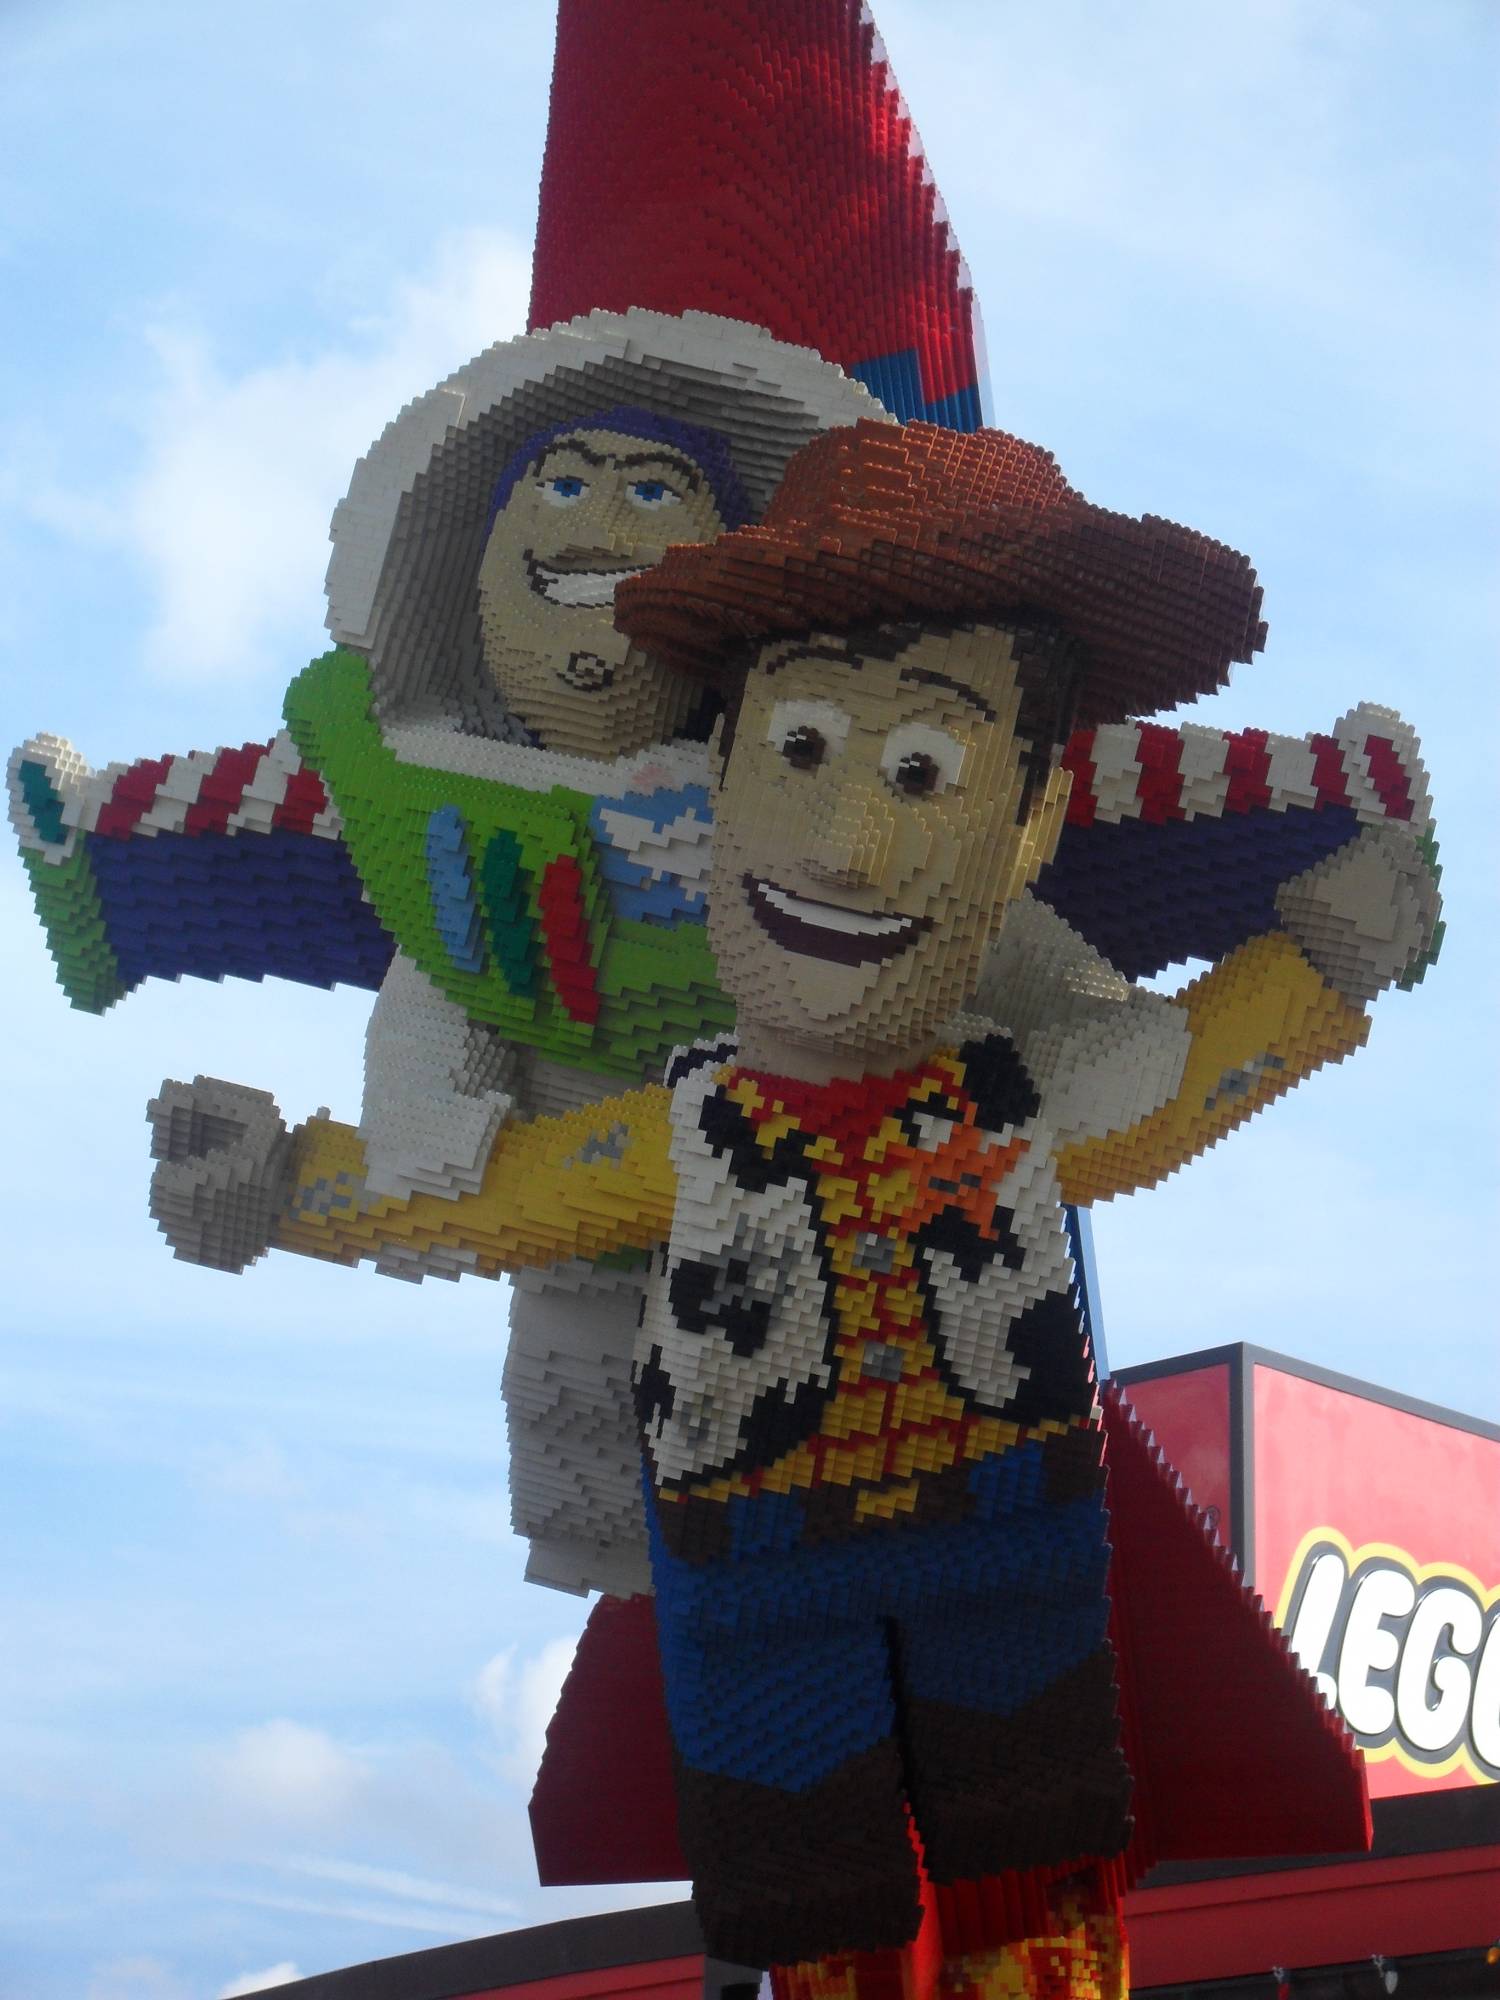 Downtown Disney - Lego Store - Woody and Buzz